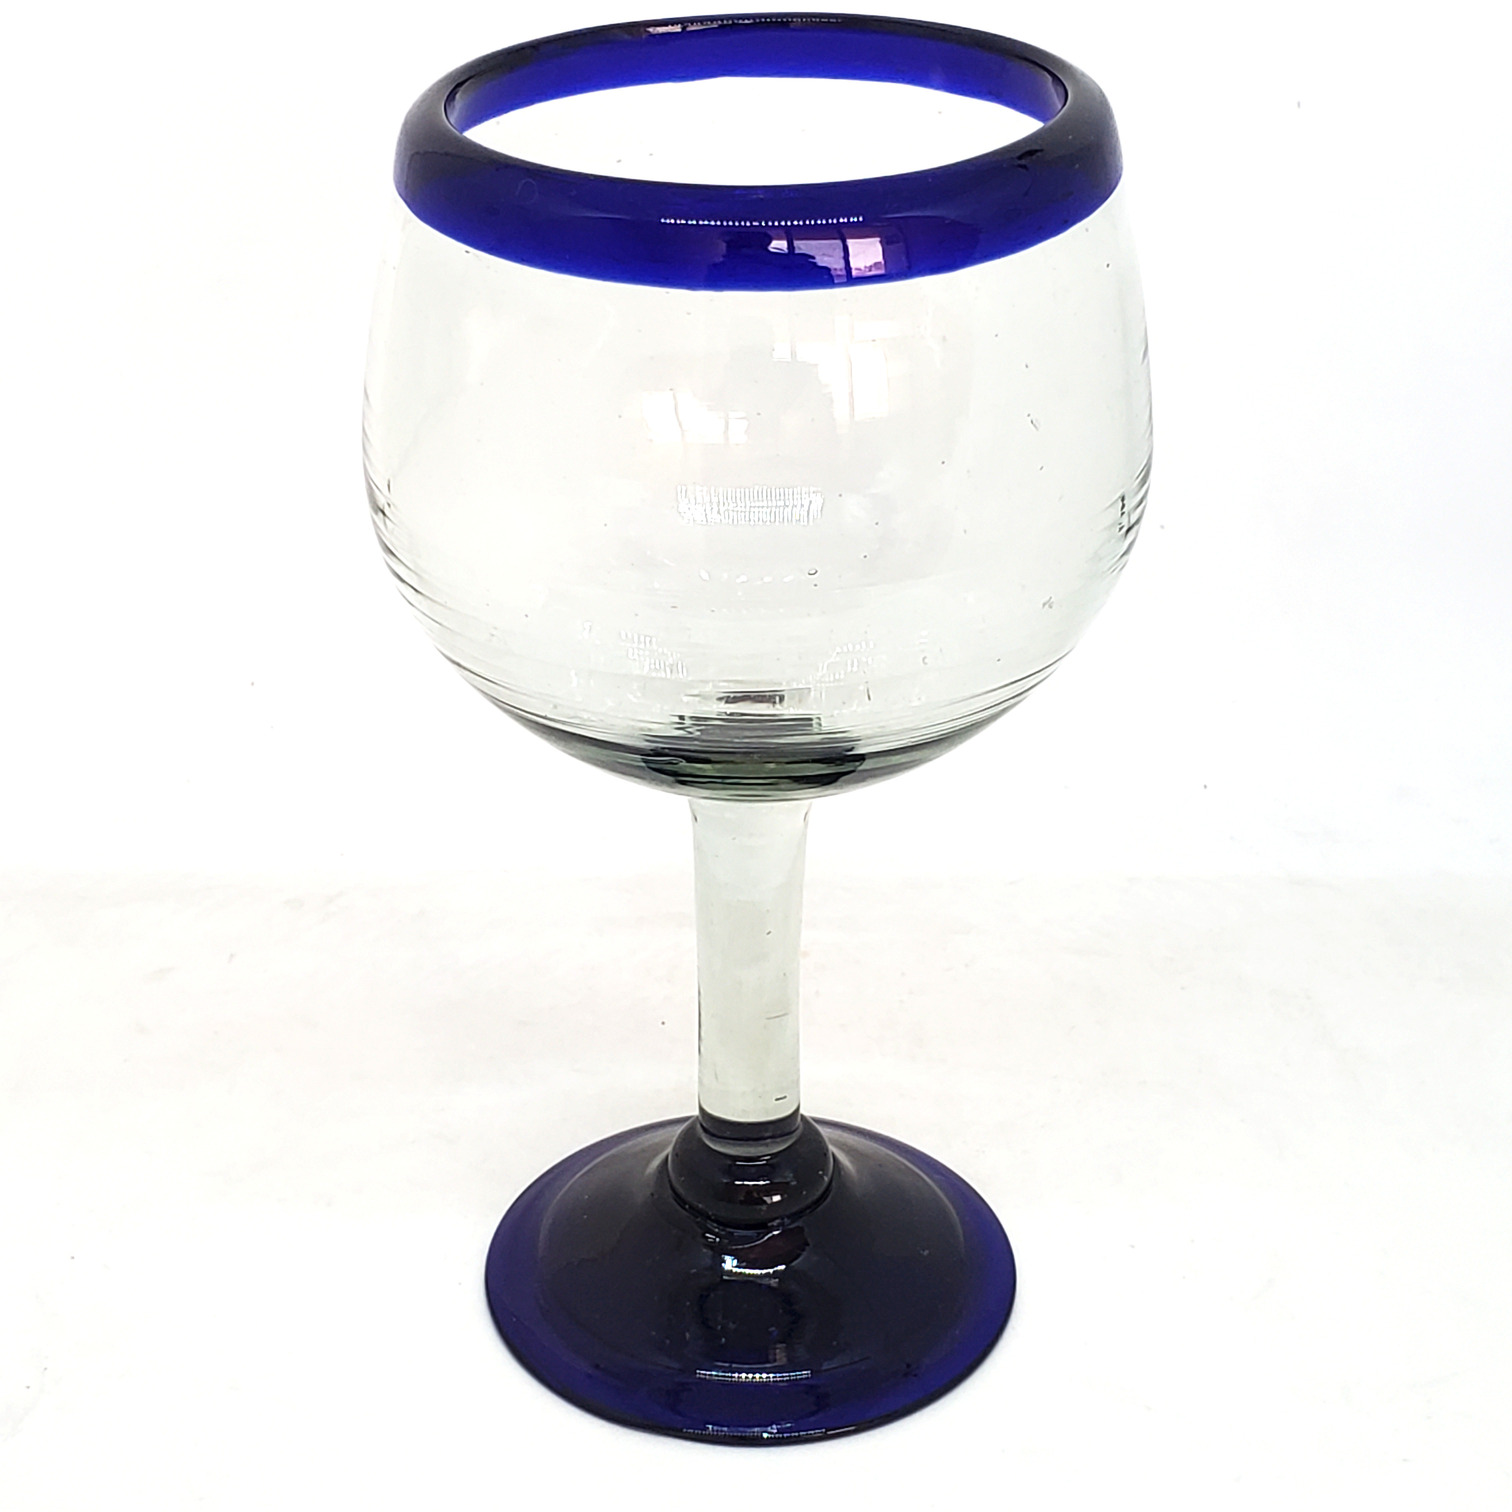 Wholesale Colored Rim Glassware / Cobalt Blue Rim 15 oz Balloon Wine Glasses  / These balloon wine glasses are the largest of their class, you will enjoy them as they capture the bouquet of a fine red wine.